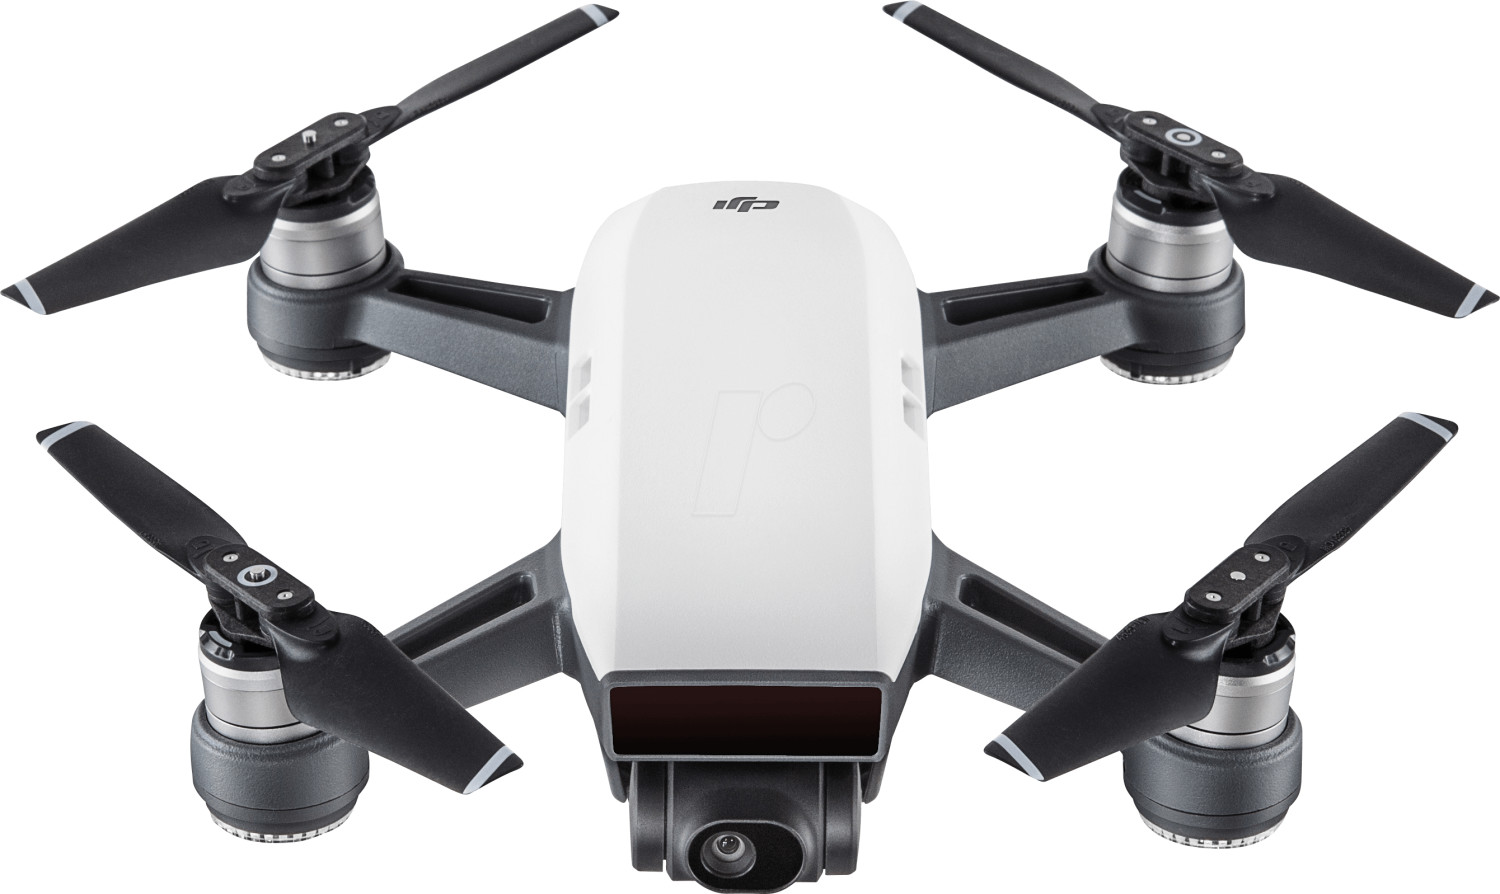 Buy DJI Spark from £769.00 (Today) – Best Deals on idealo.co.uk